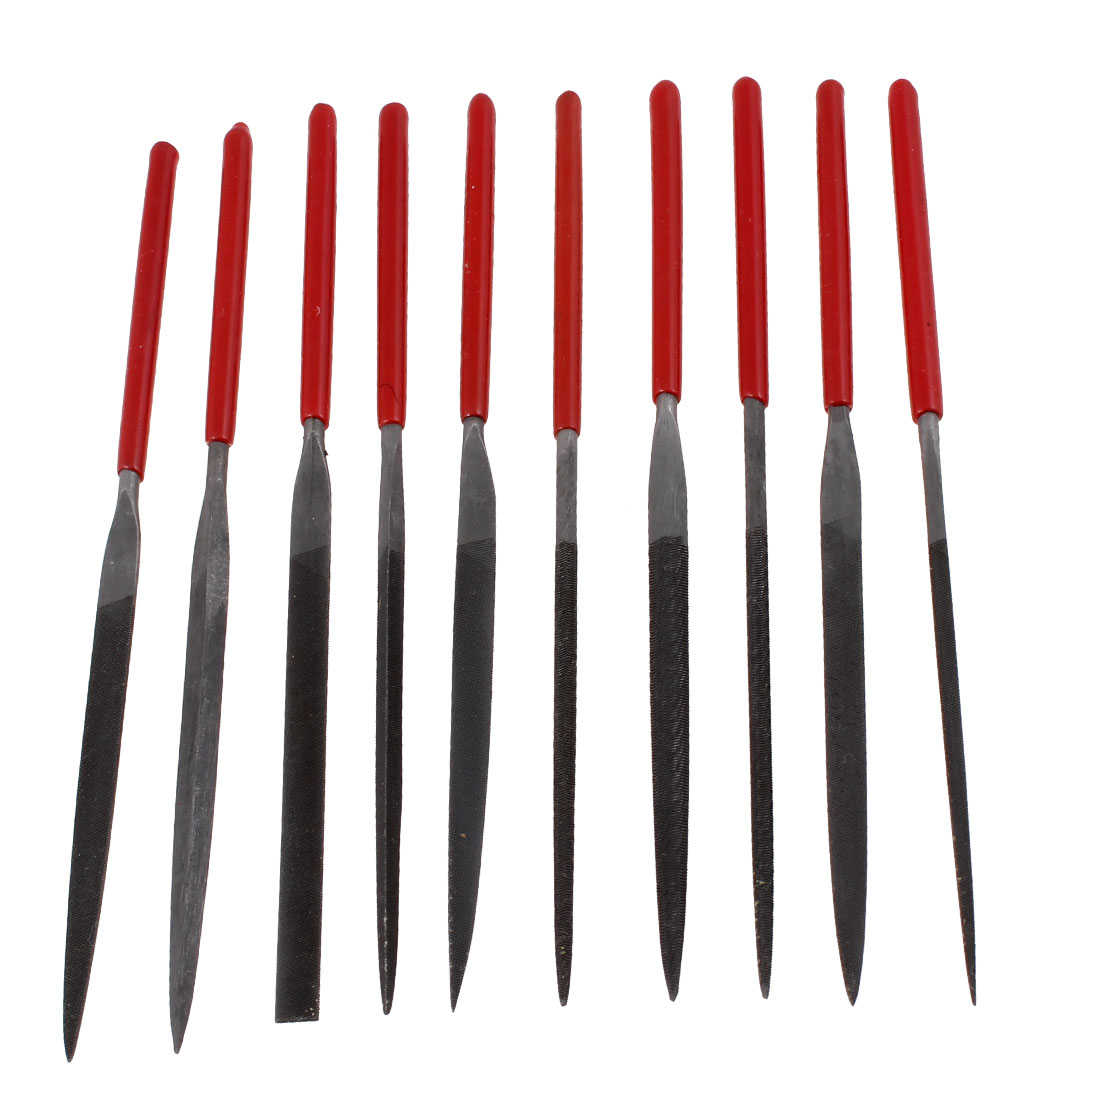 10 Pcs Gray Metal Shank Plastic Grip Checkering Needle Files for Woodworking